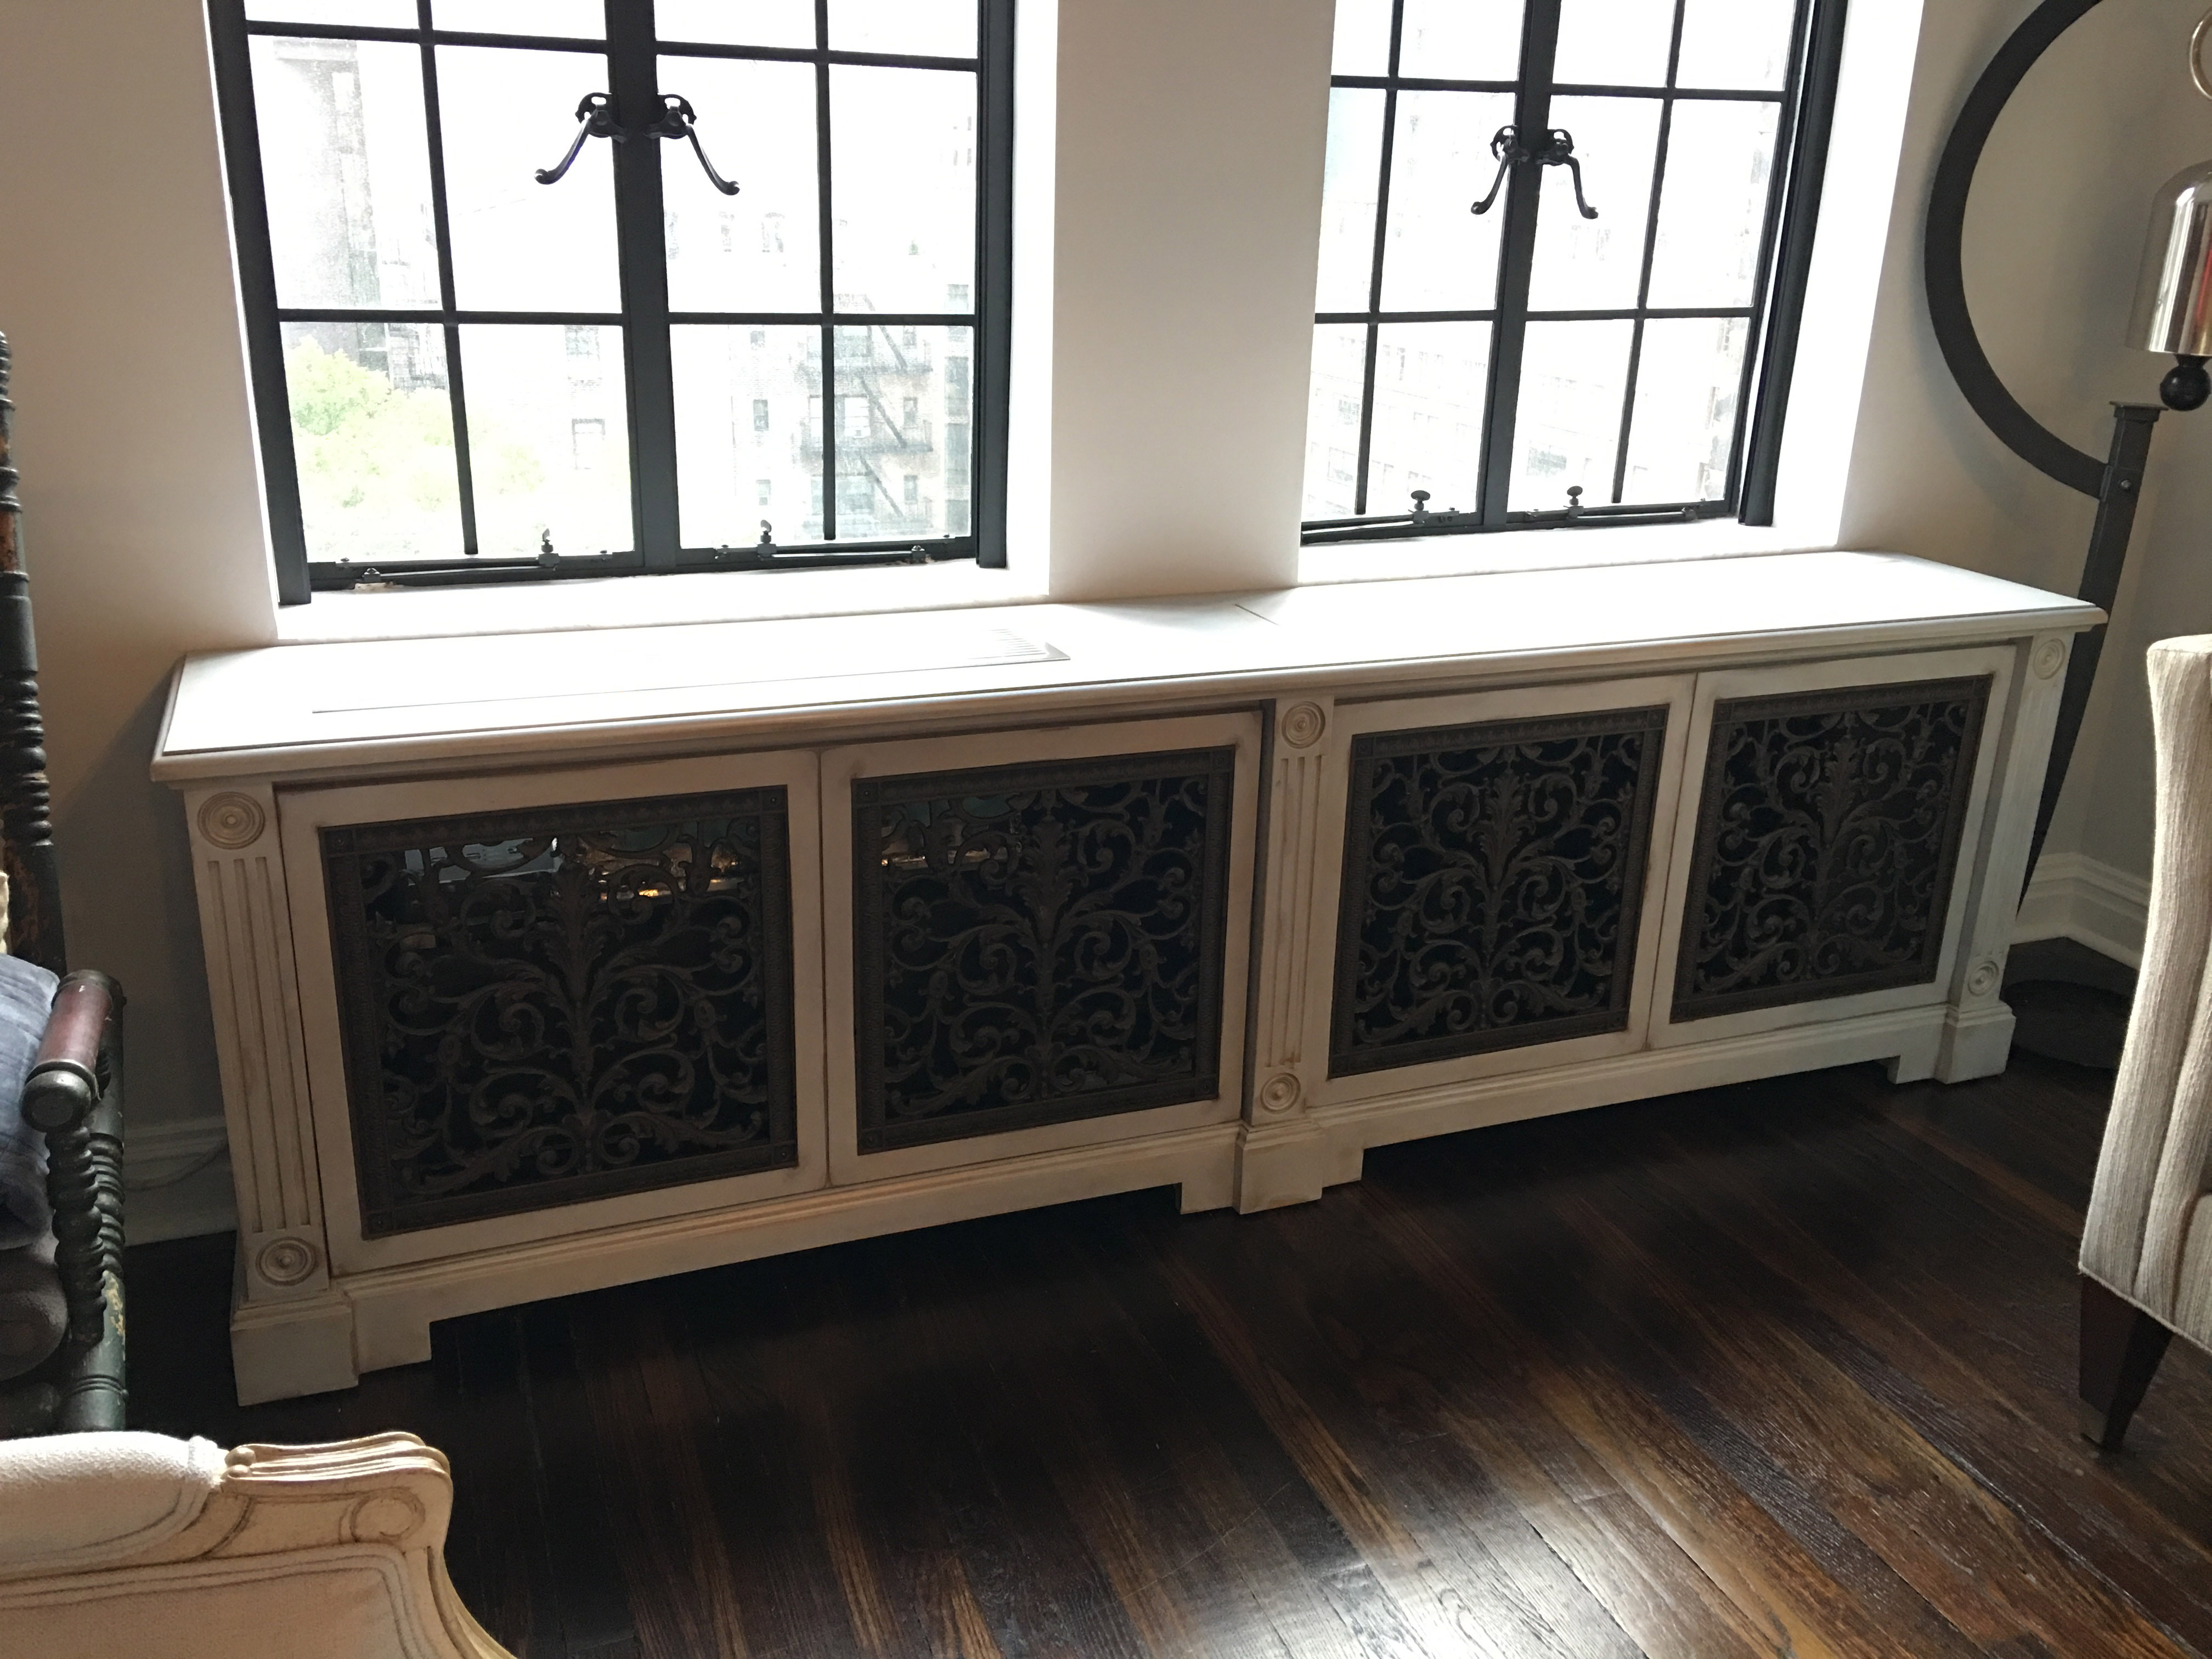 Radiator Cover made with 4 Louis XIV Style Decorative Grilles 16x16.